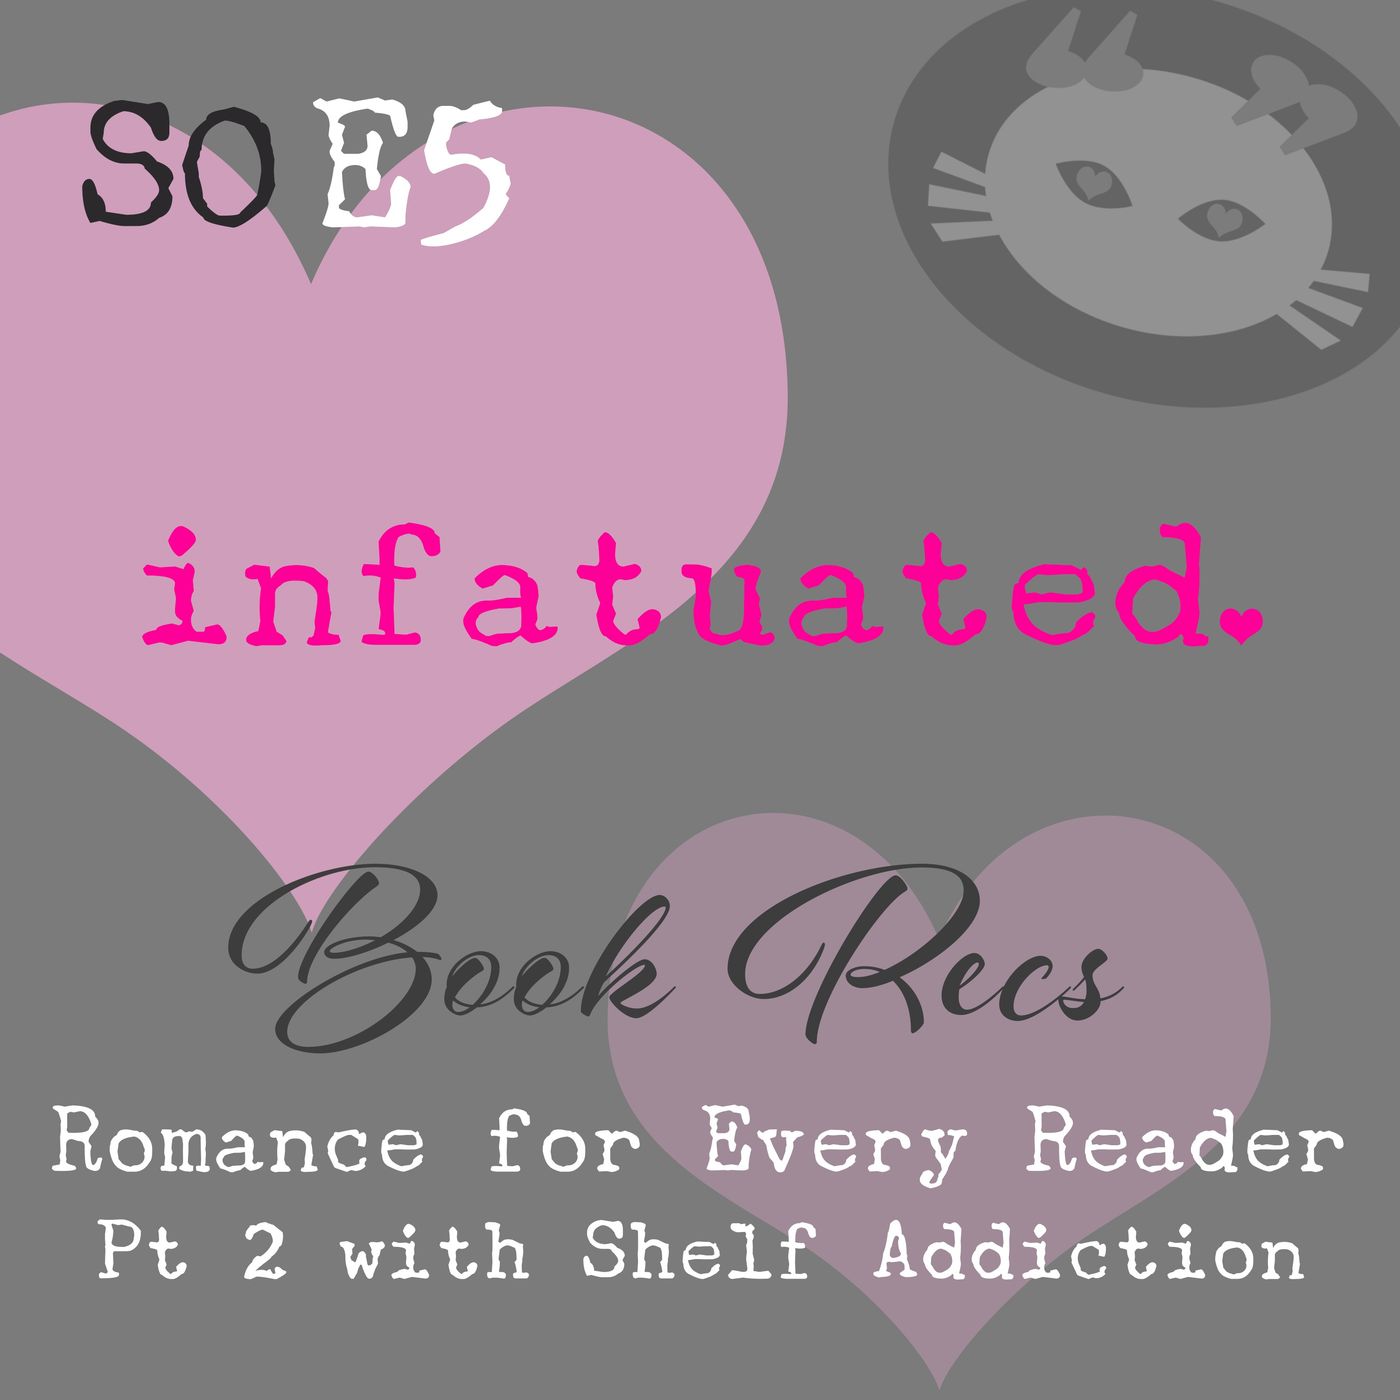 S0E5: Romance for Every Reader (Part 2 of 2) with Shelf Addiction